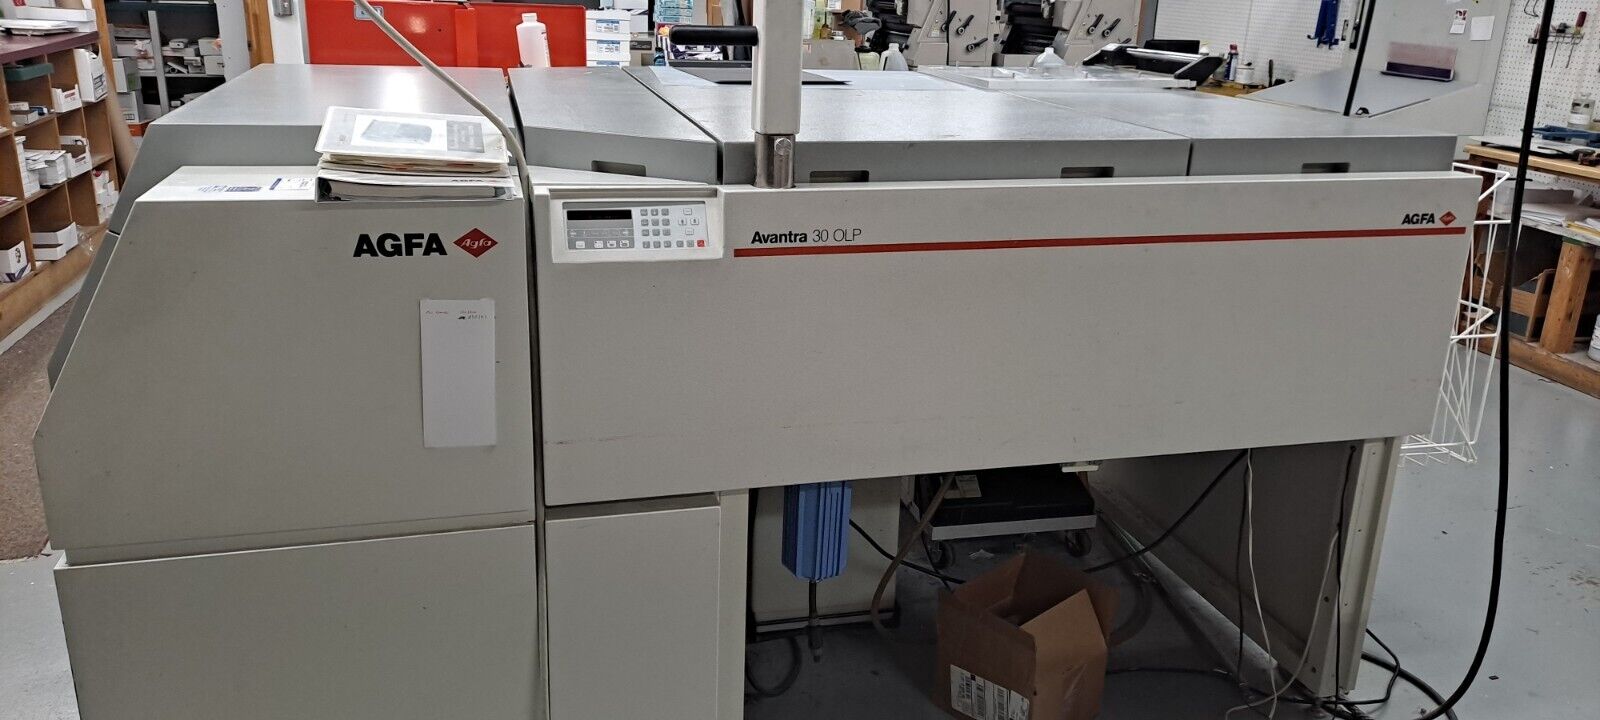 AGFA Avantra 30 OLP imagesetter / platemaker with RIP software *